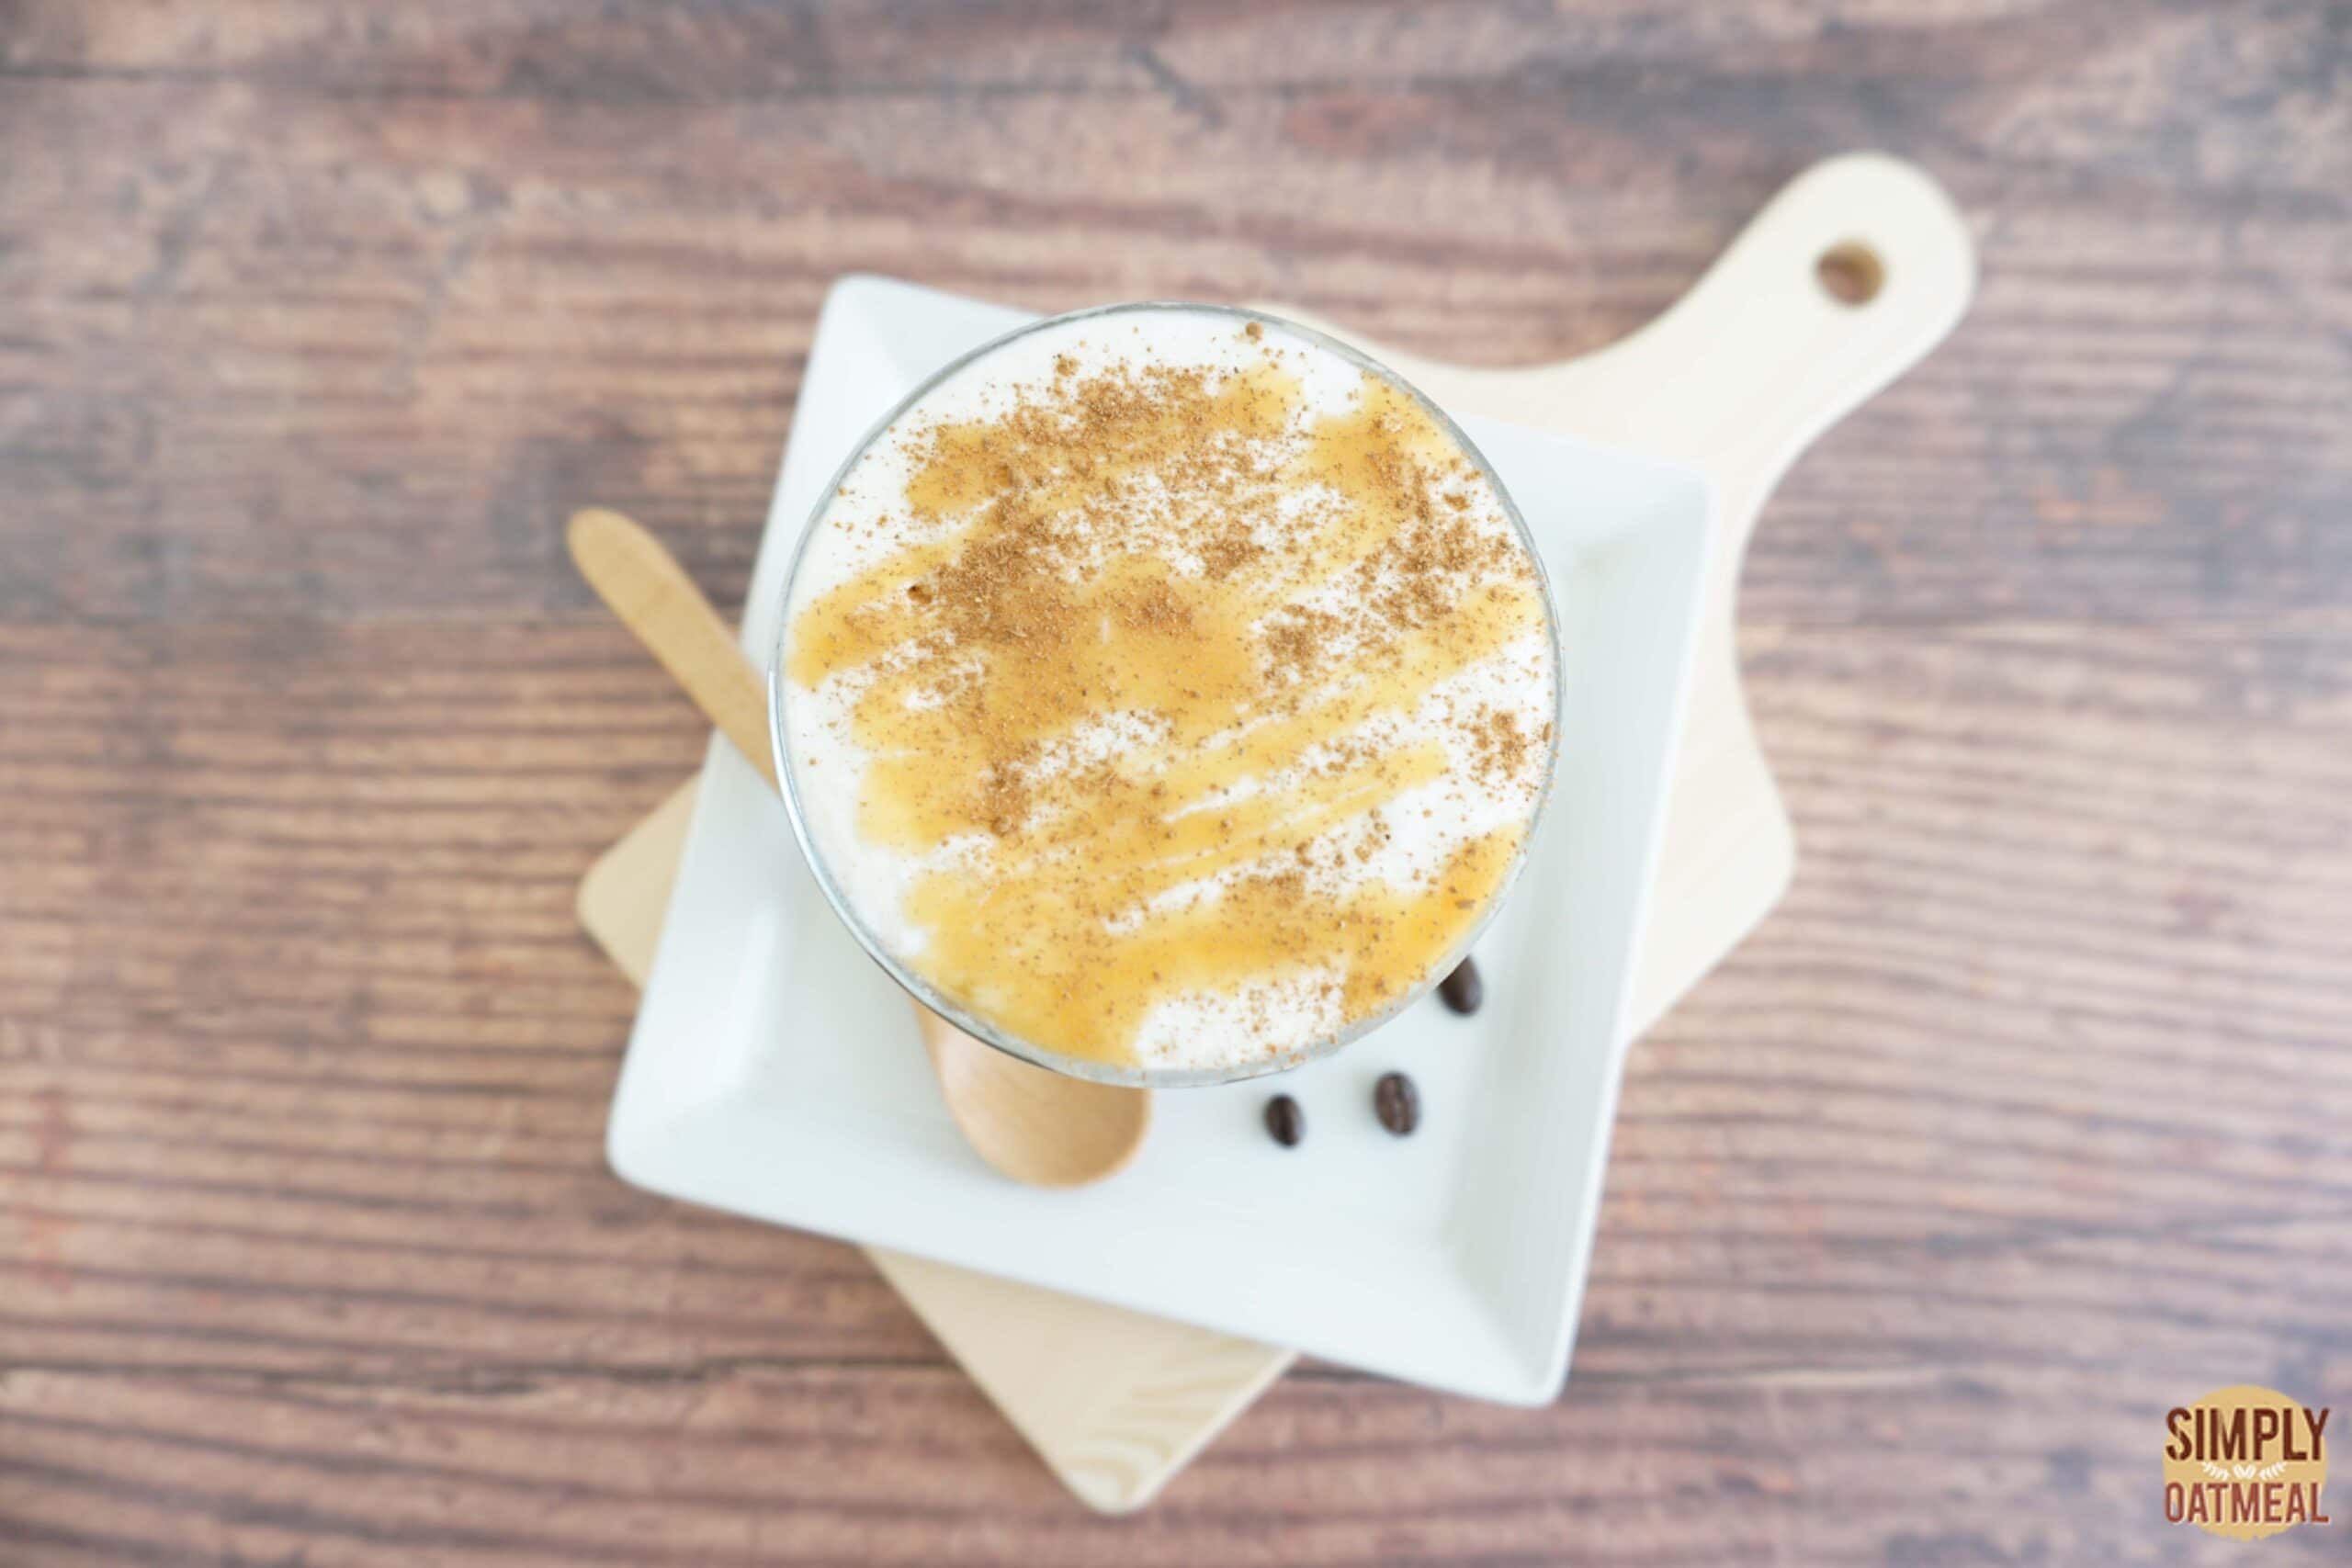 Cinnamon dolce latte overnight oats topped with hot milk foam, caramel sauce and a dash of cinnamon.